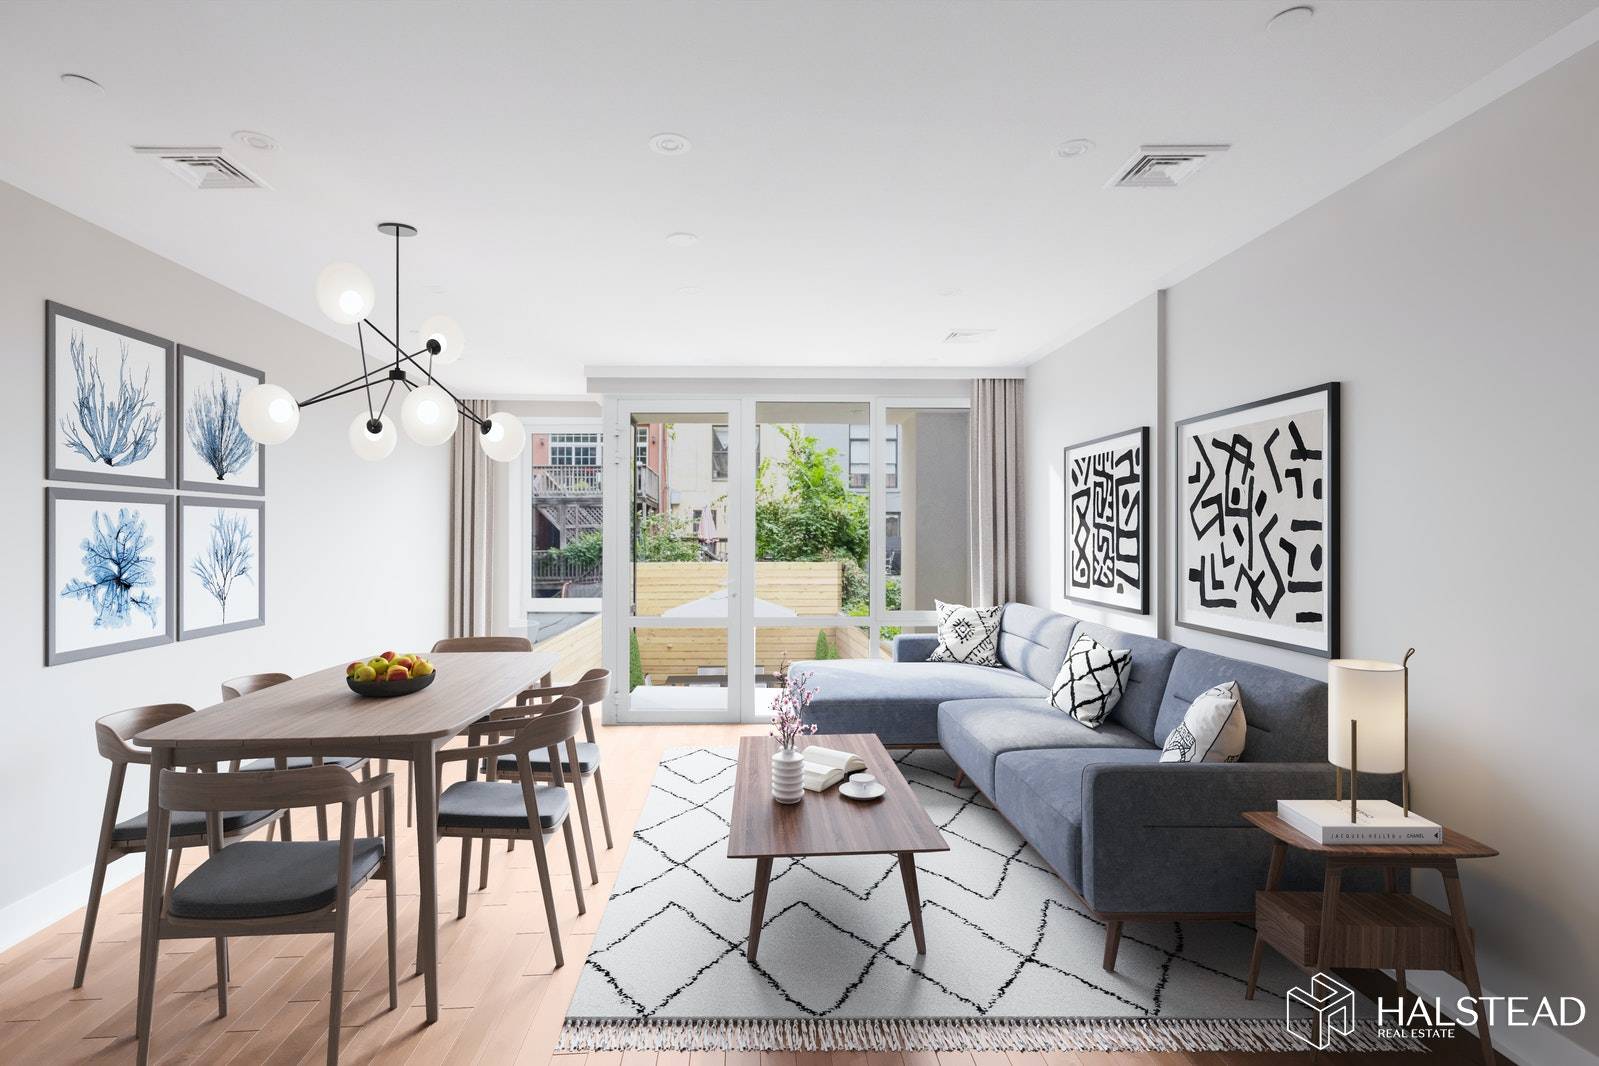 One of a kind townhouse Garden Triplex with a flawless classic and contemporary design, high ceilings, elegant finishes, large windows and indoor outdoor living.